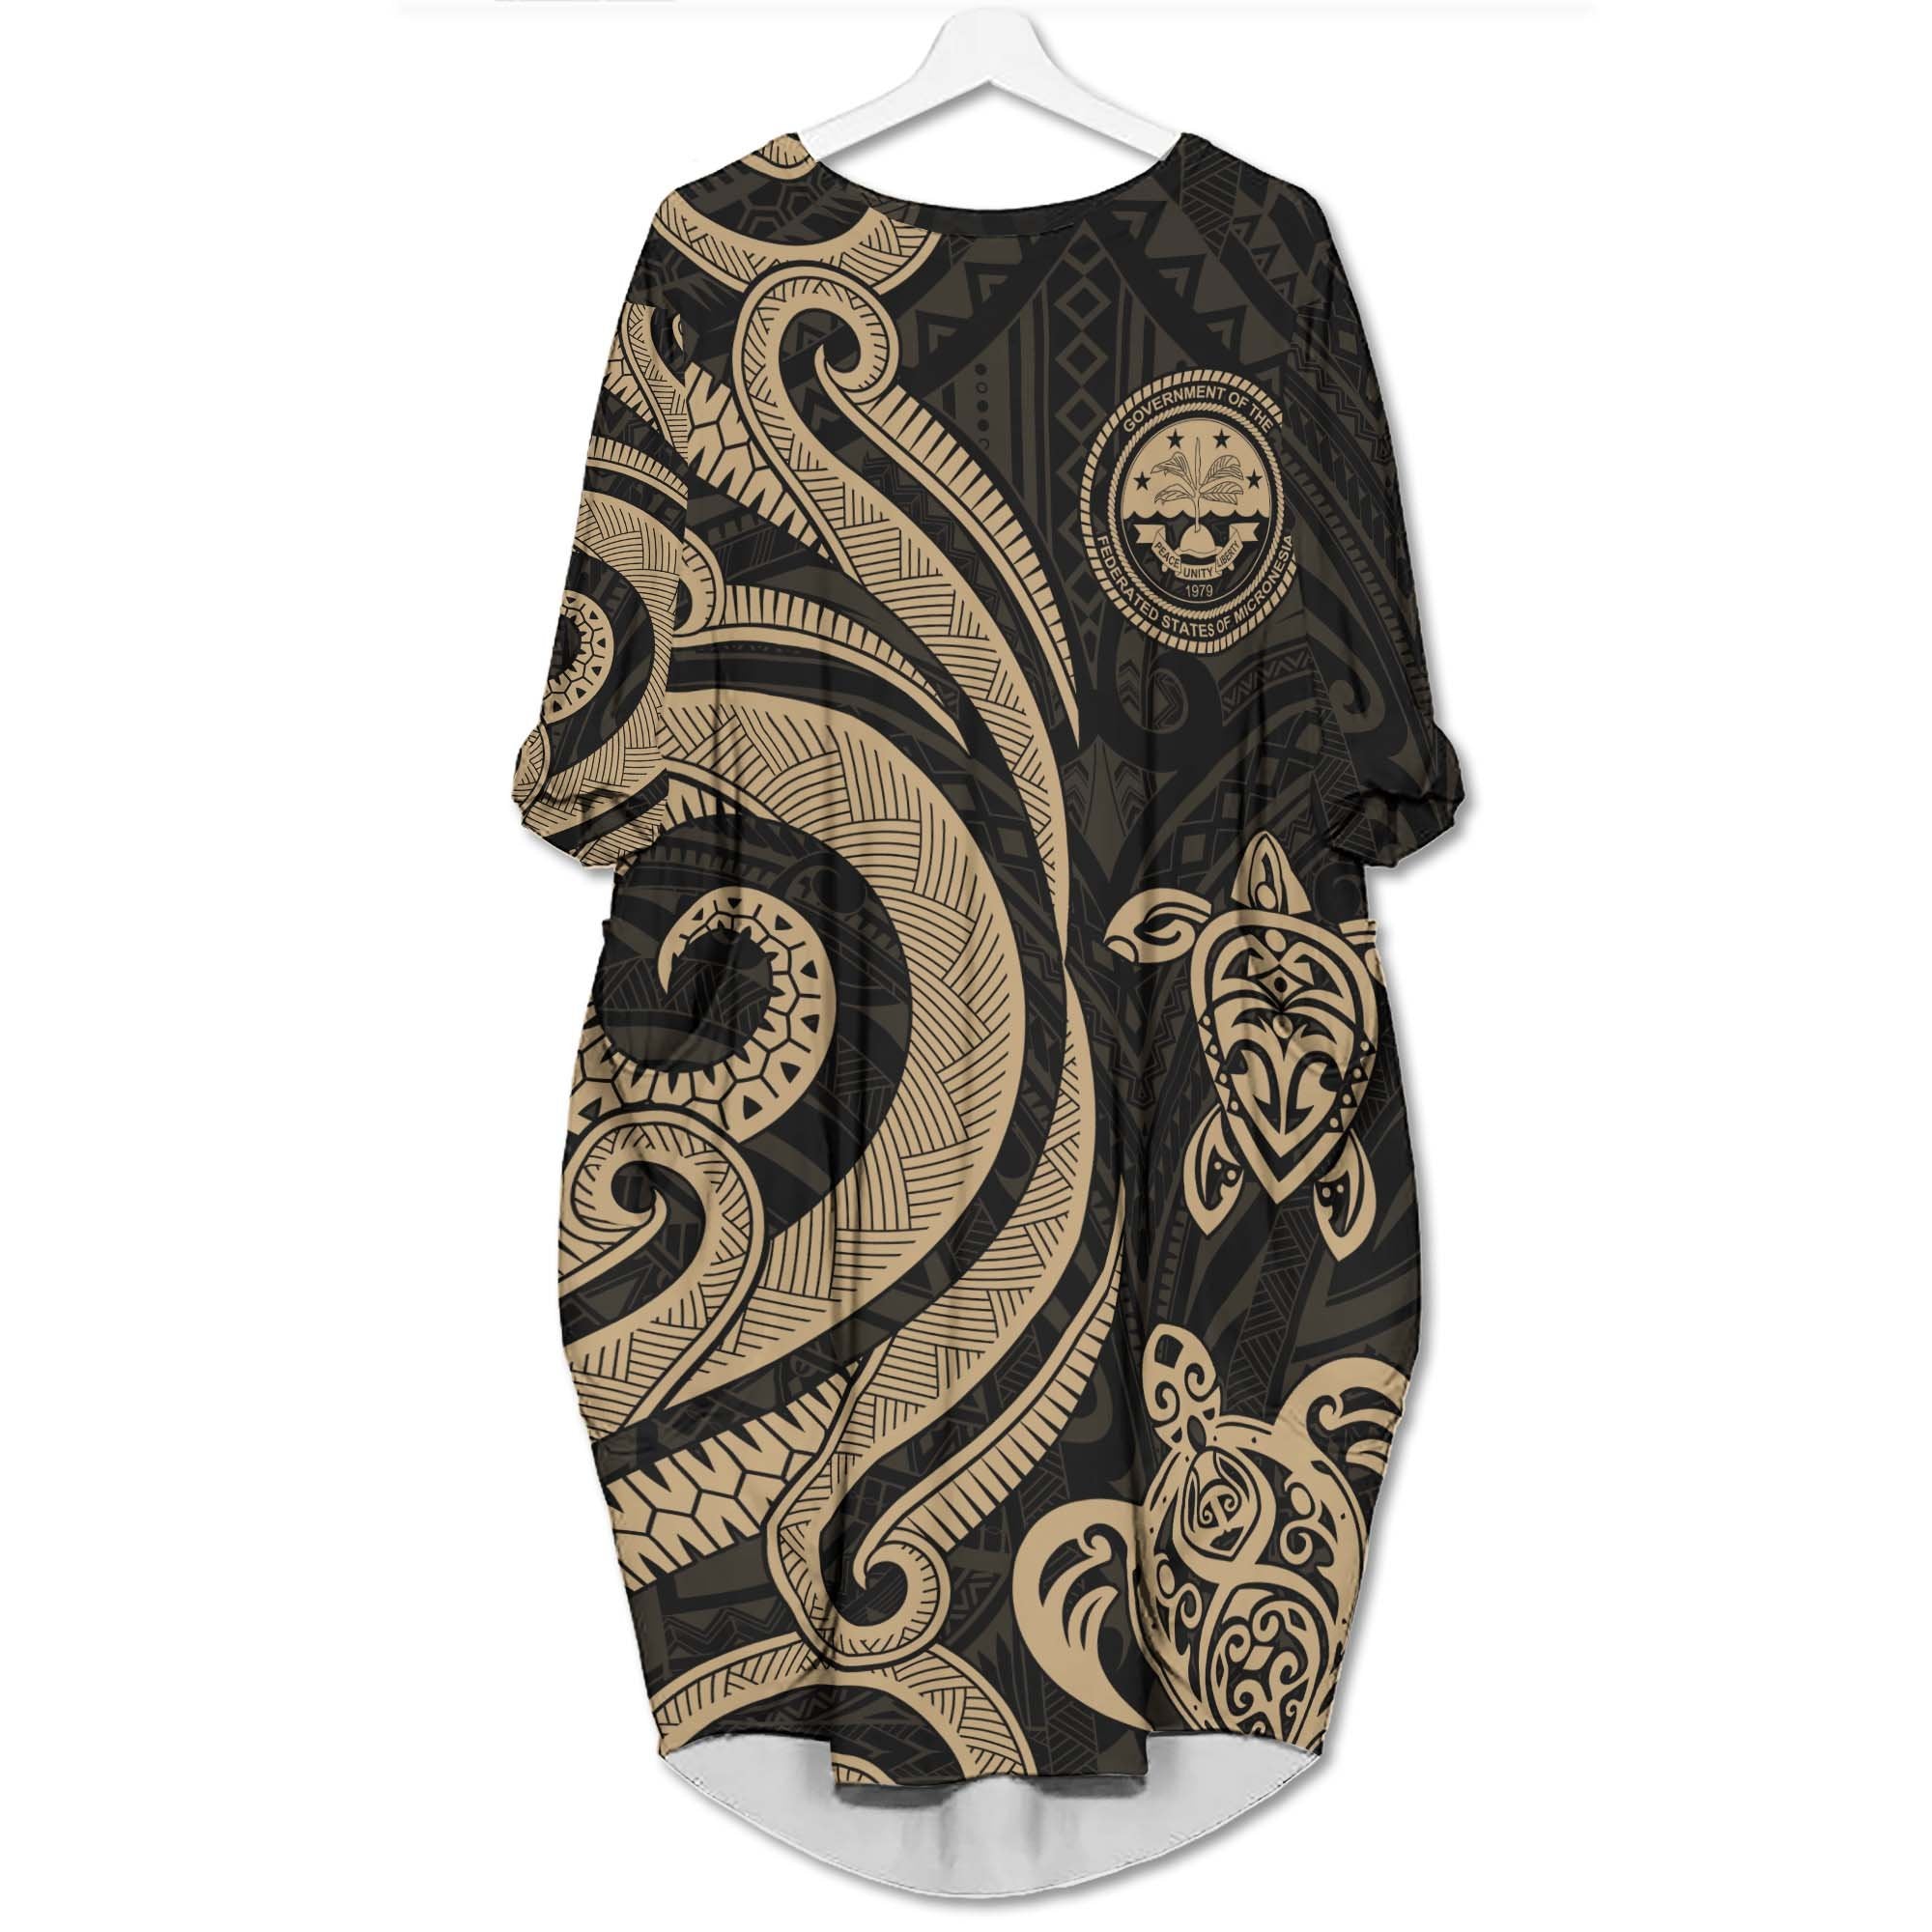 Federated States of Micronesia Batwing Pocket Dress - Gold Tentacle Turtle Women Gold - Polynesian Pride